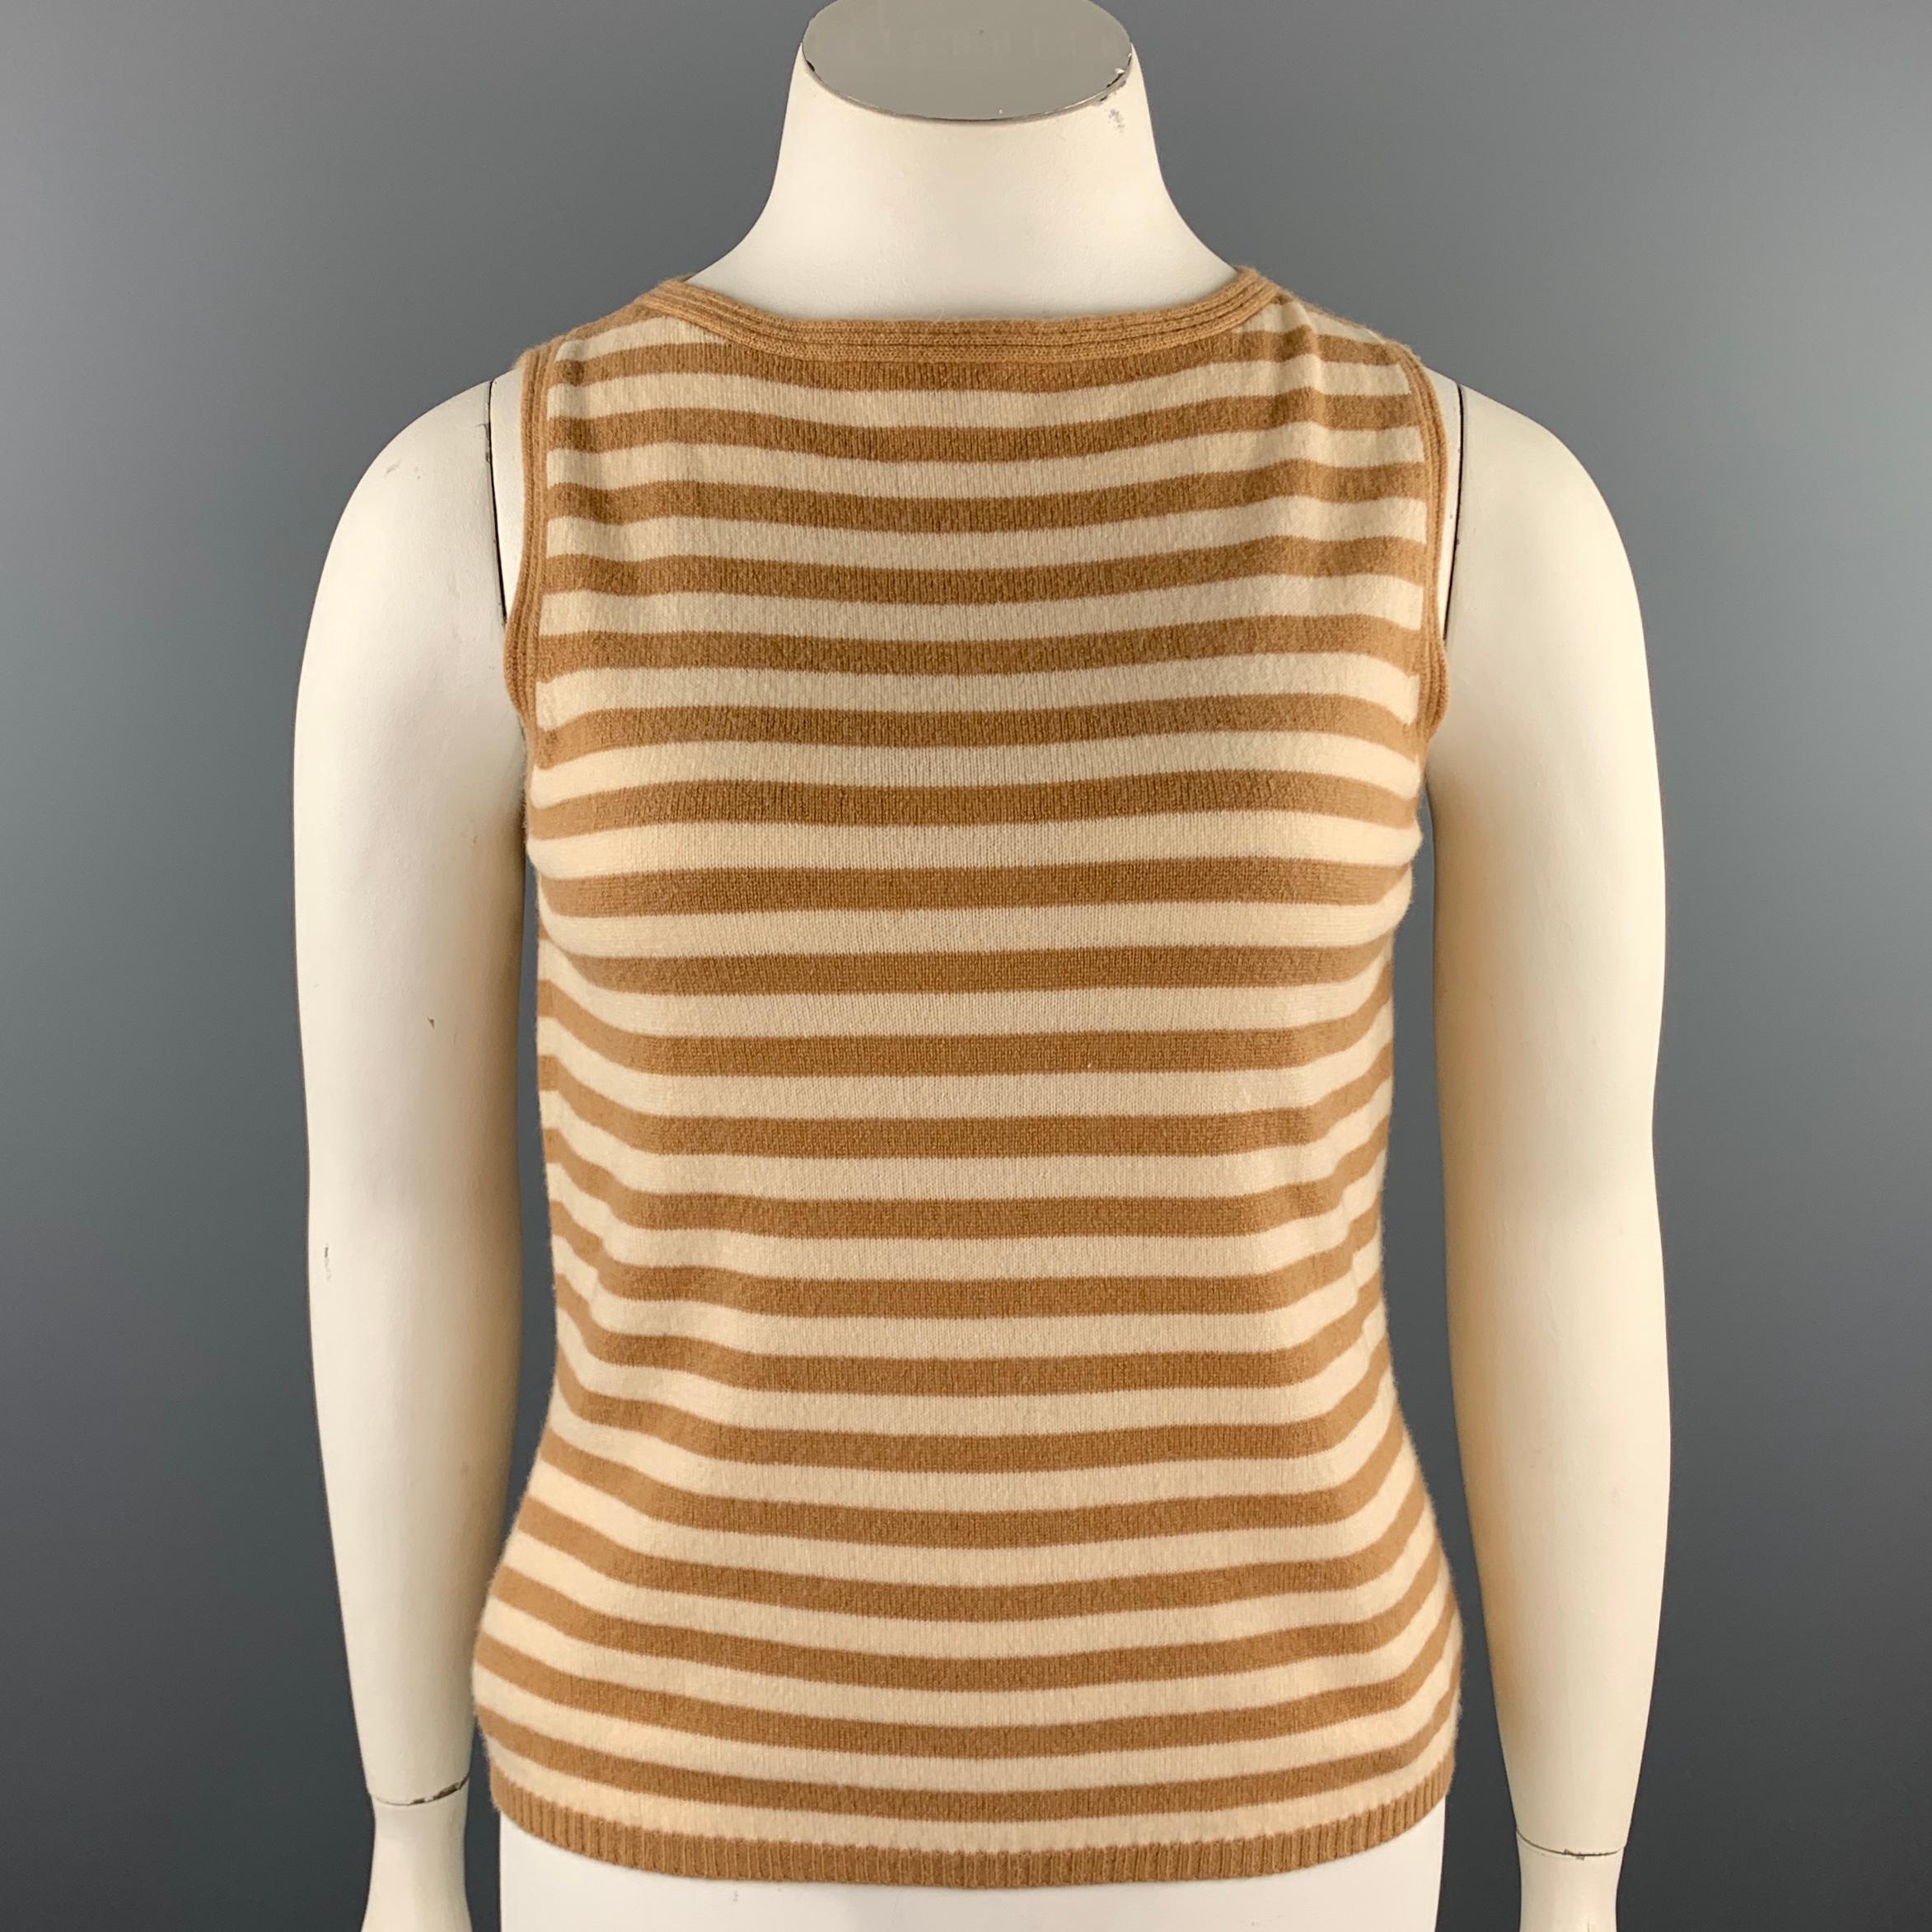 LES COPAINS top comes in a camel knitted stripe cashmere with a ribbed hem featuring a matching open front cardigan. Made in Italy.

Excellent Pre-Owned Condition.
Marked: 48/V

Measurements:

-Top
Shoulder: 14 in. 
Bust: 36 in 
Length: 21.5 in.